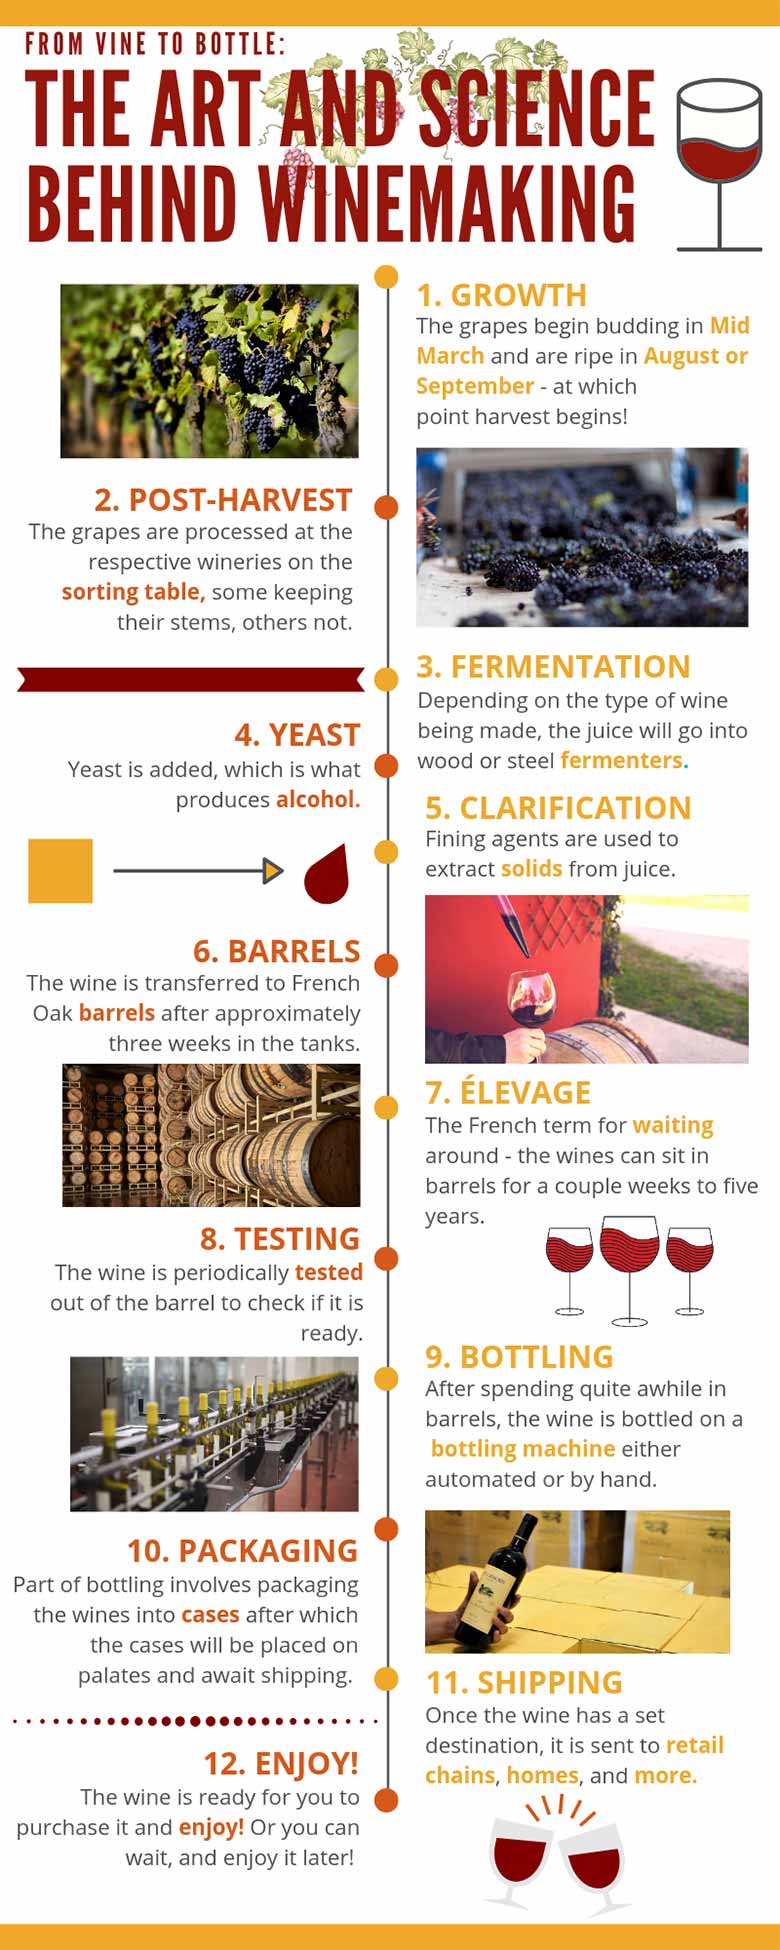 Infographic about the art and science behind winemaking